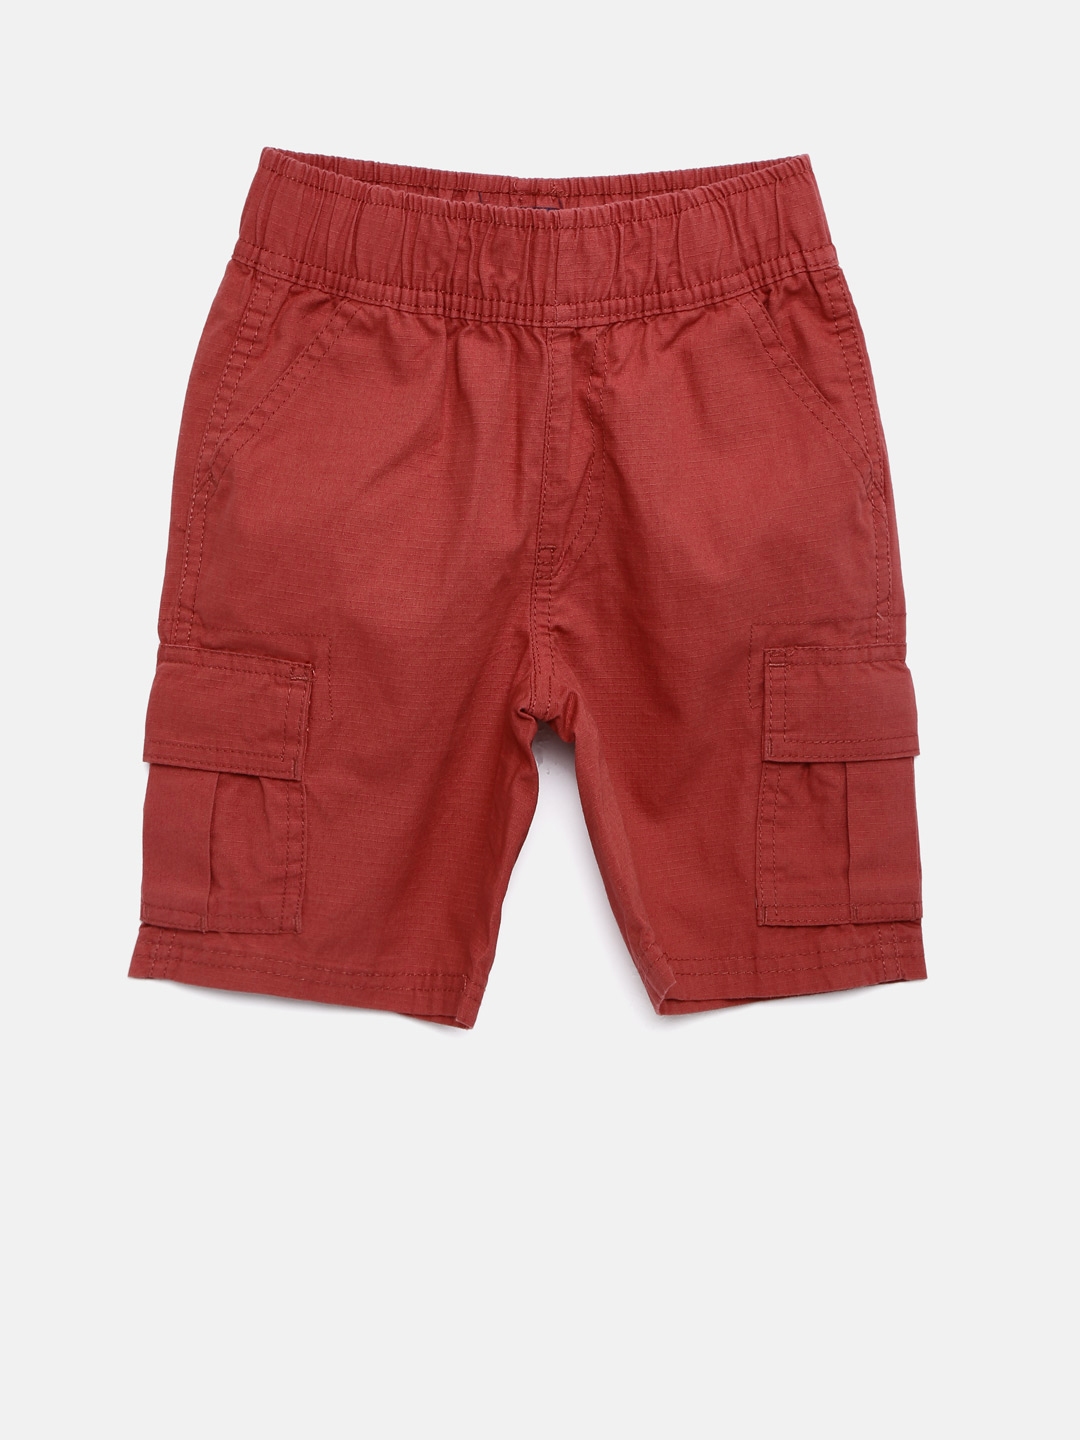 Buy The Childrens Place Boys Red Solid Regular Fit Cargo Shorts ...